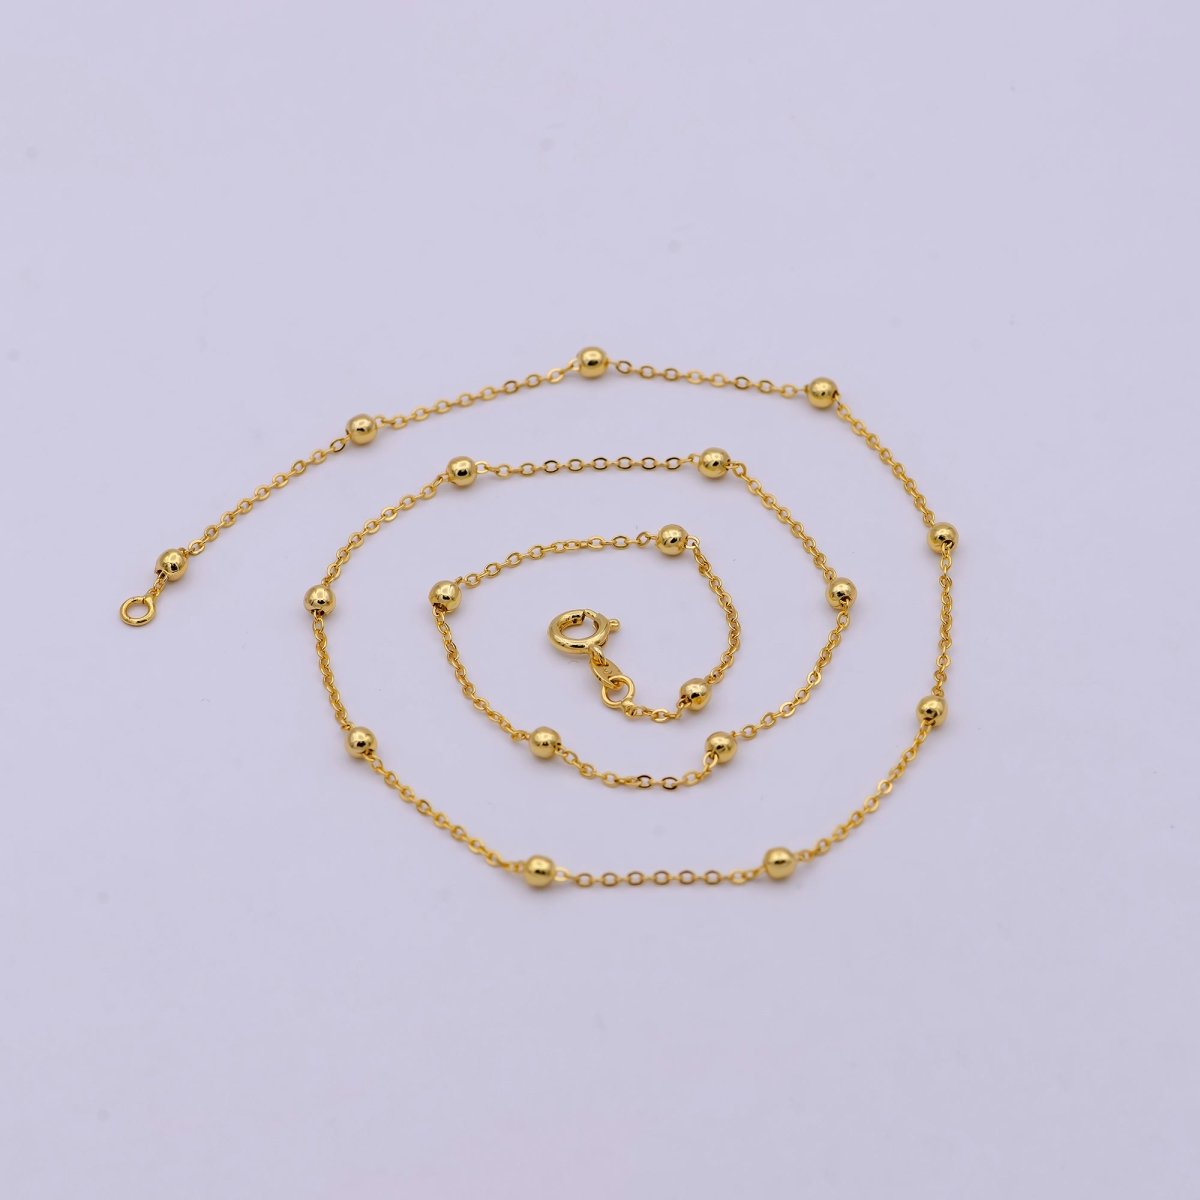 24K Gold Filled 3mm Satellite Bead Cable 20 Inch Layering Chain Necklace | WA-2155 Clearance Pricing - DLUXCA